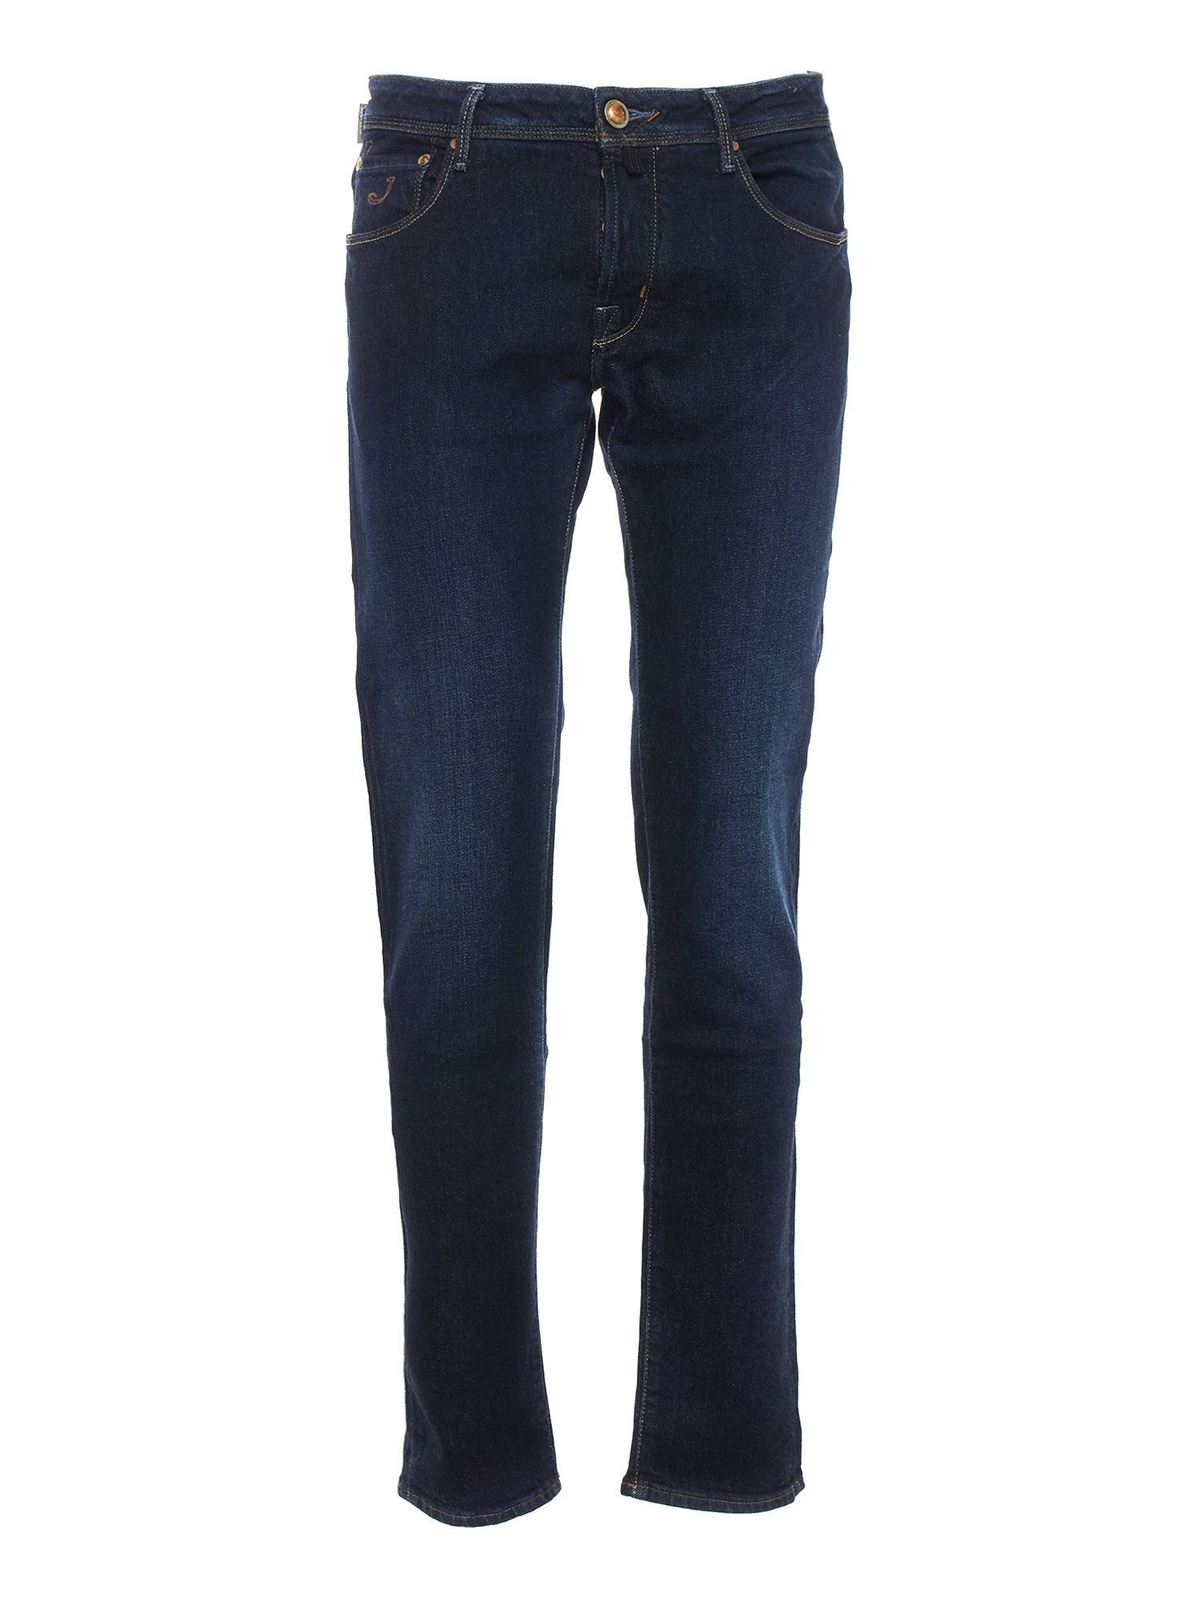 JACOB COHEN LOGO FADED JEANS IN BLUE